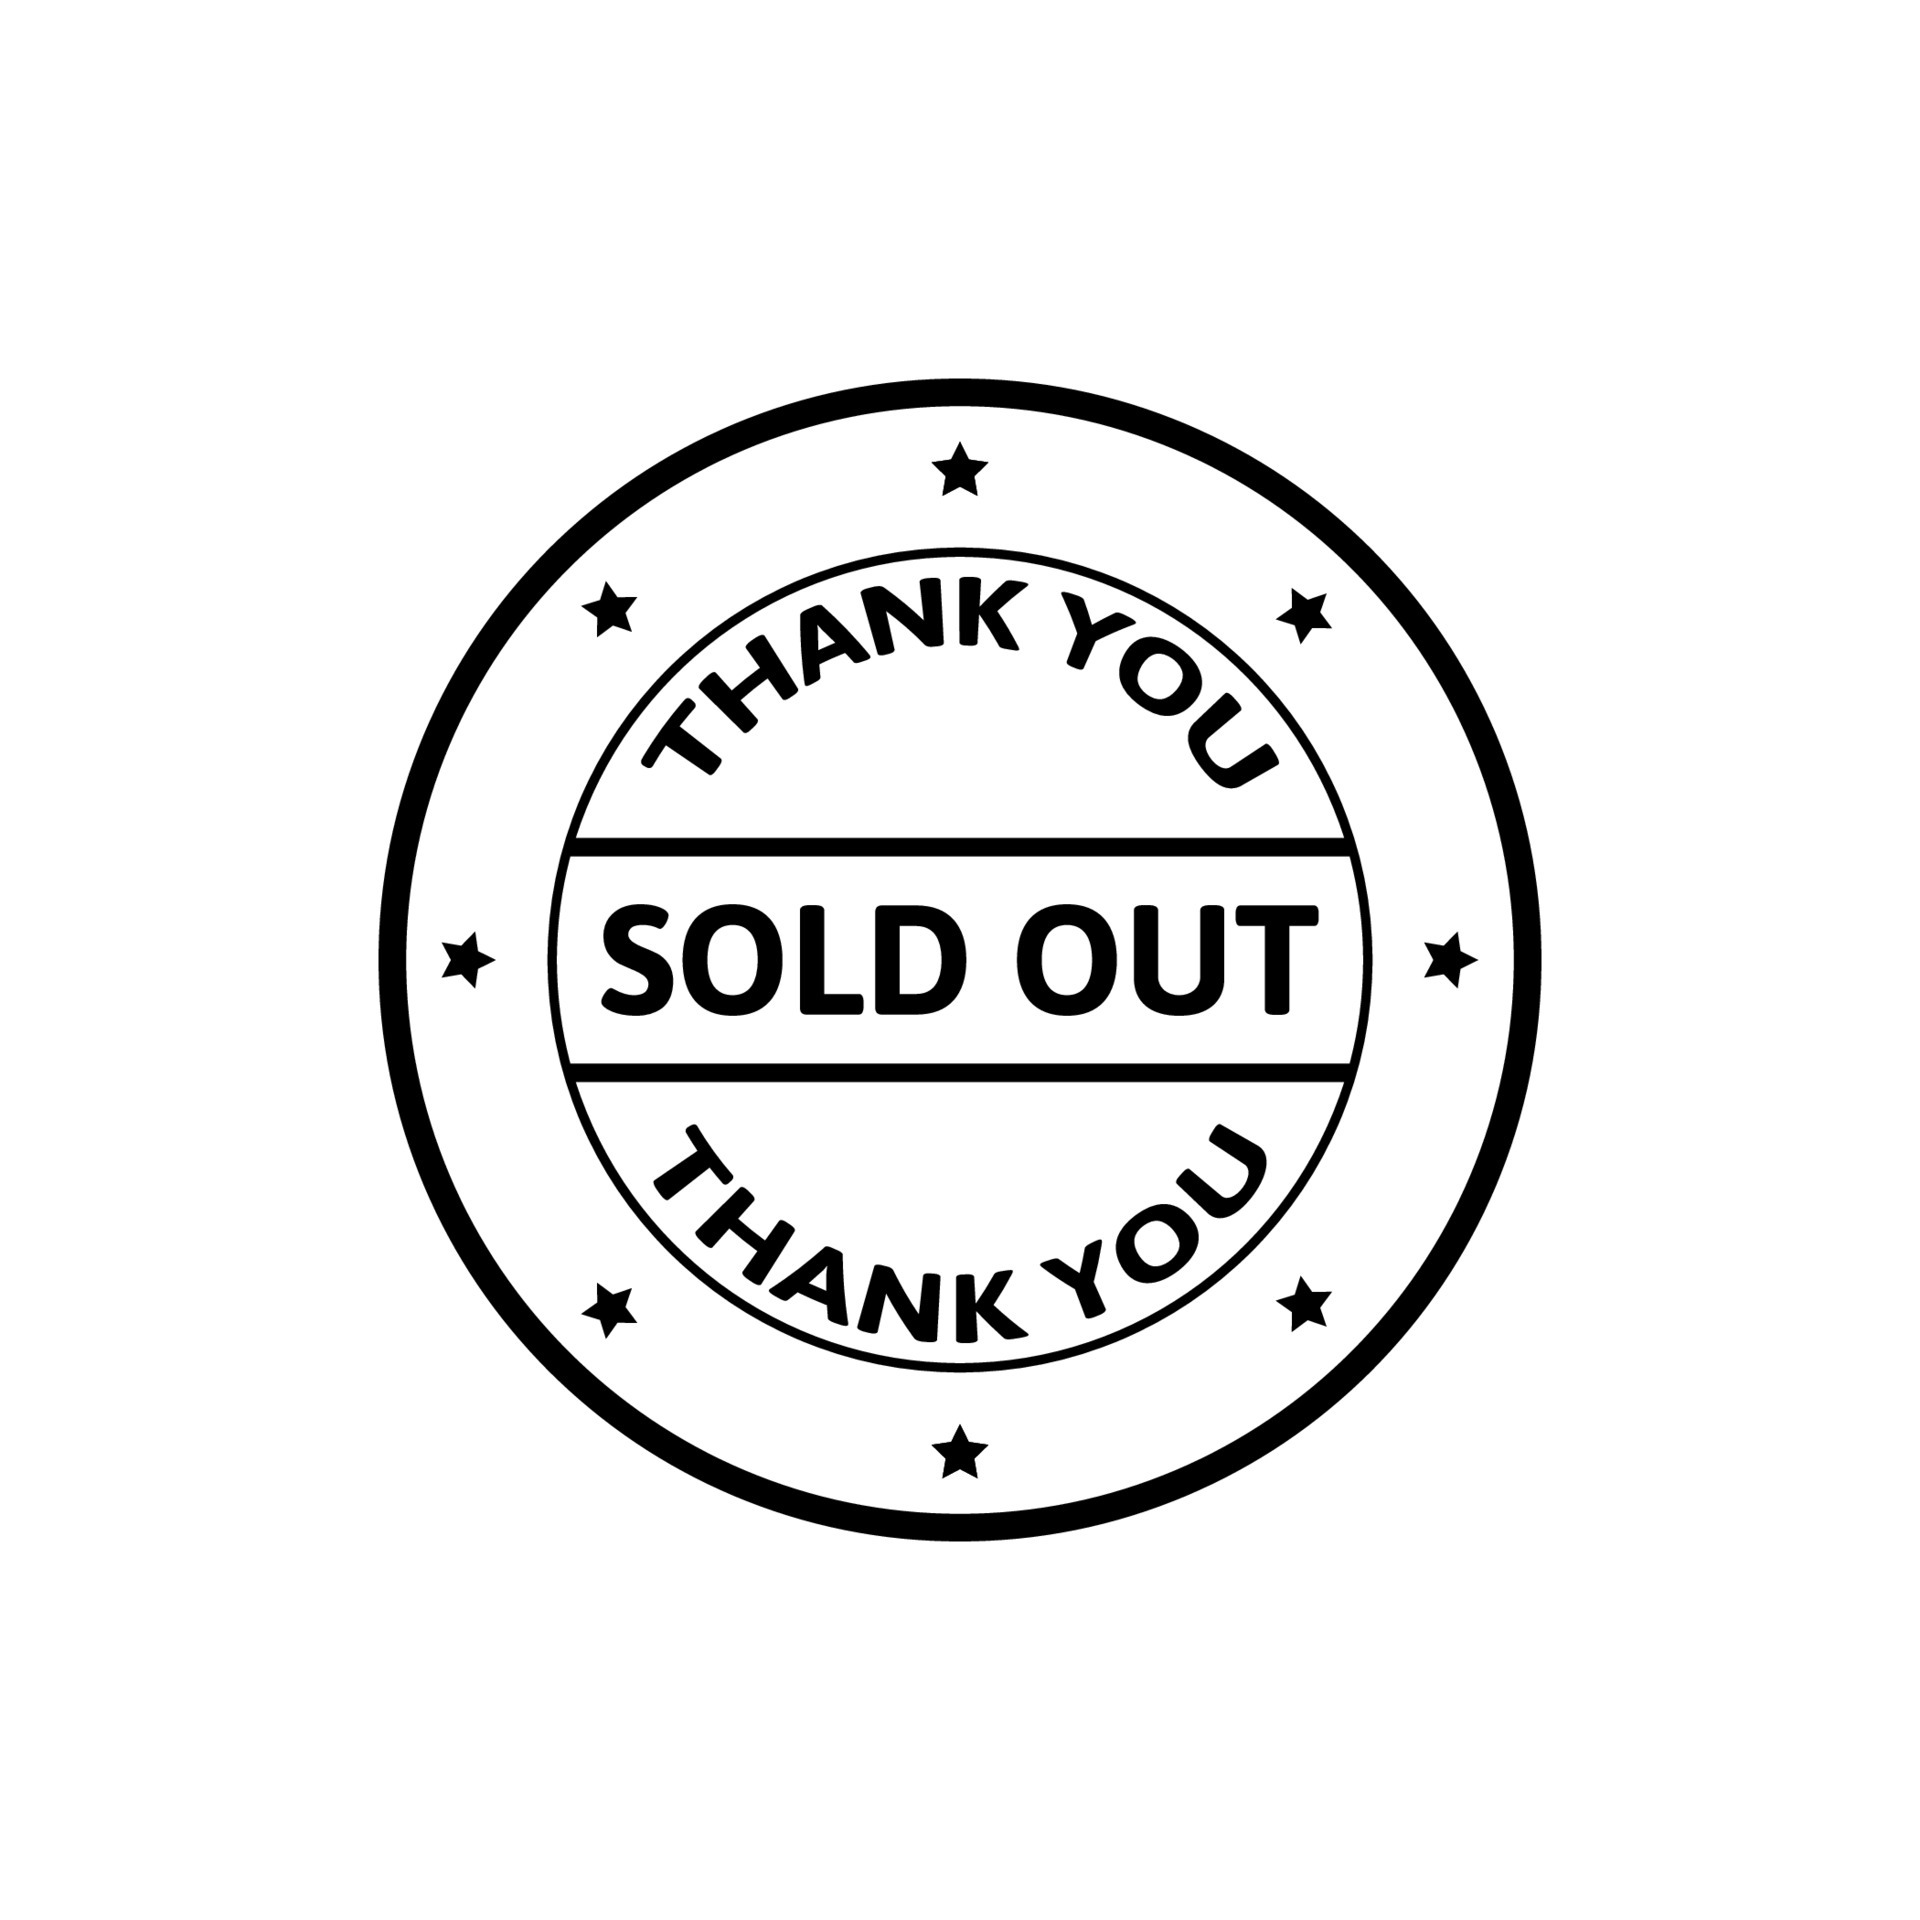 sold out！thank you♡こちら購入希望です - jkc78.com